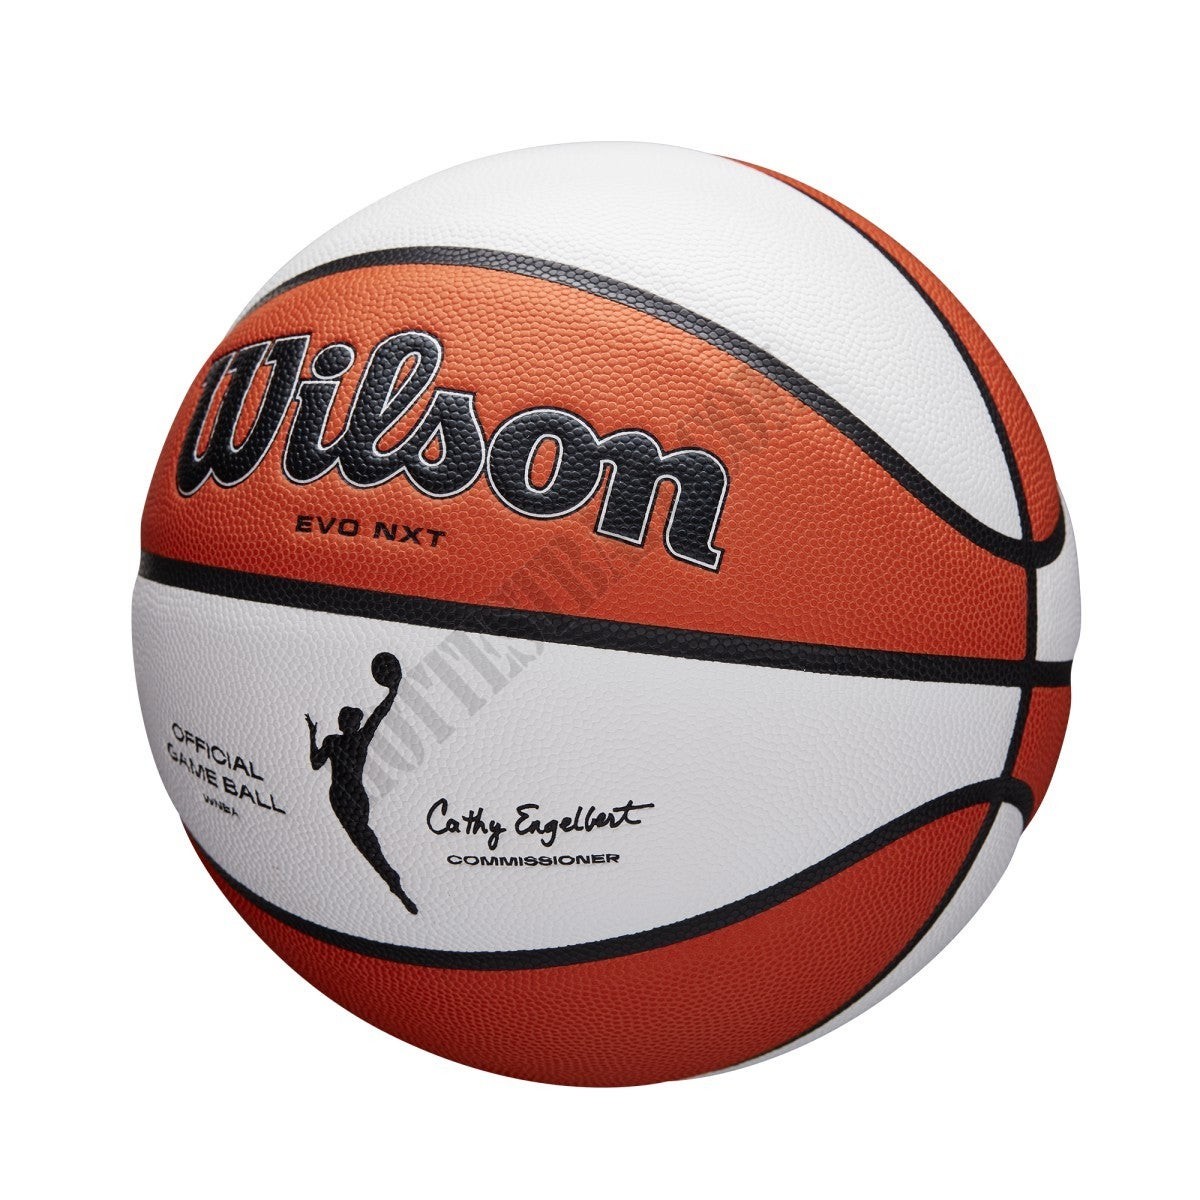 WNBA Official Game Basketball - Wilson Discount Store - -6